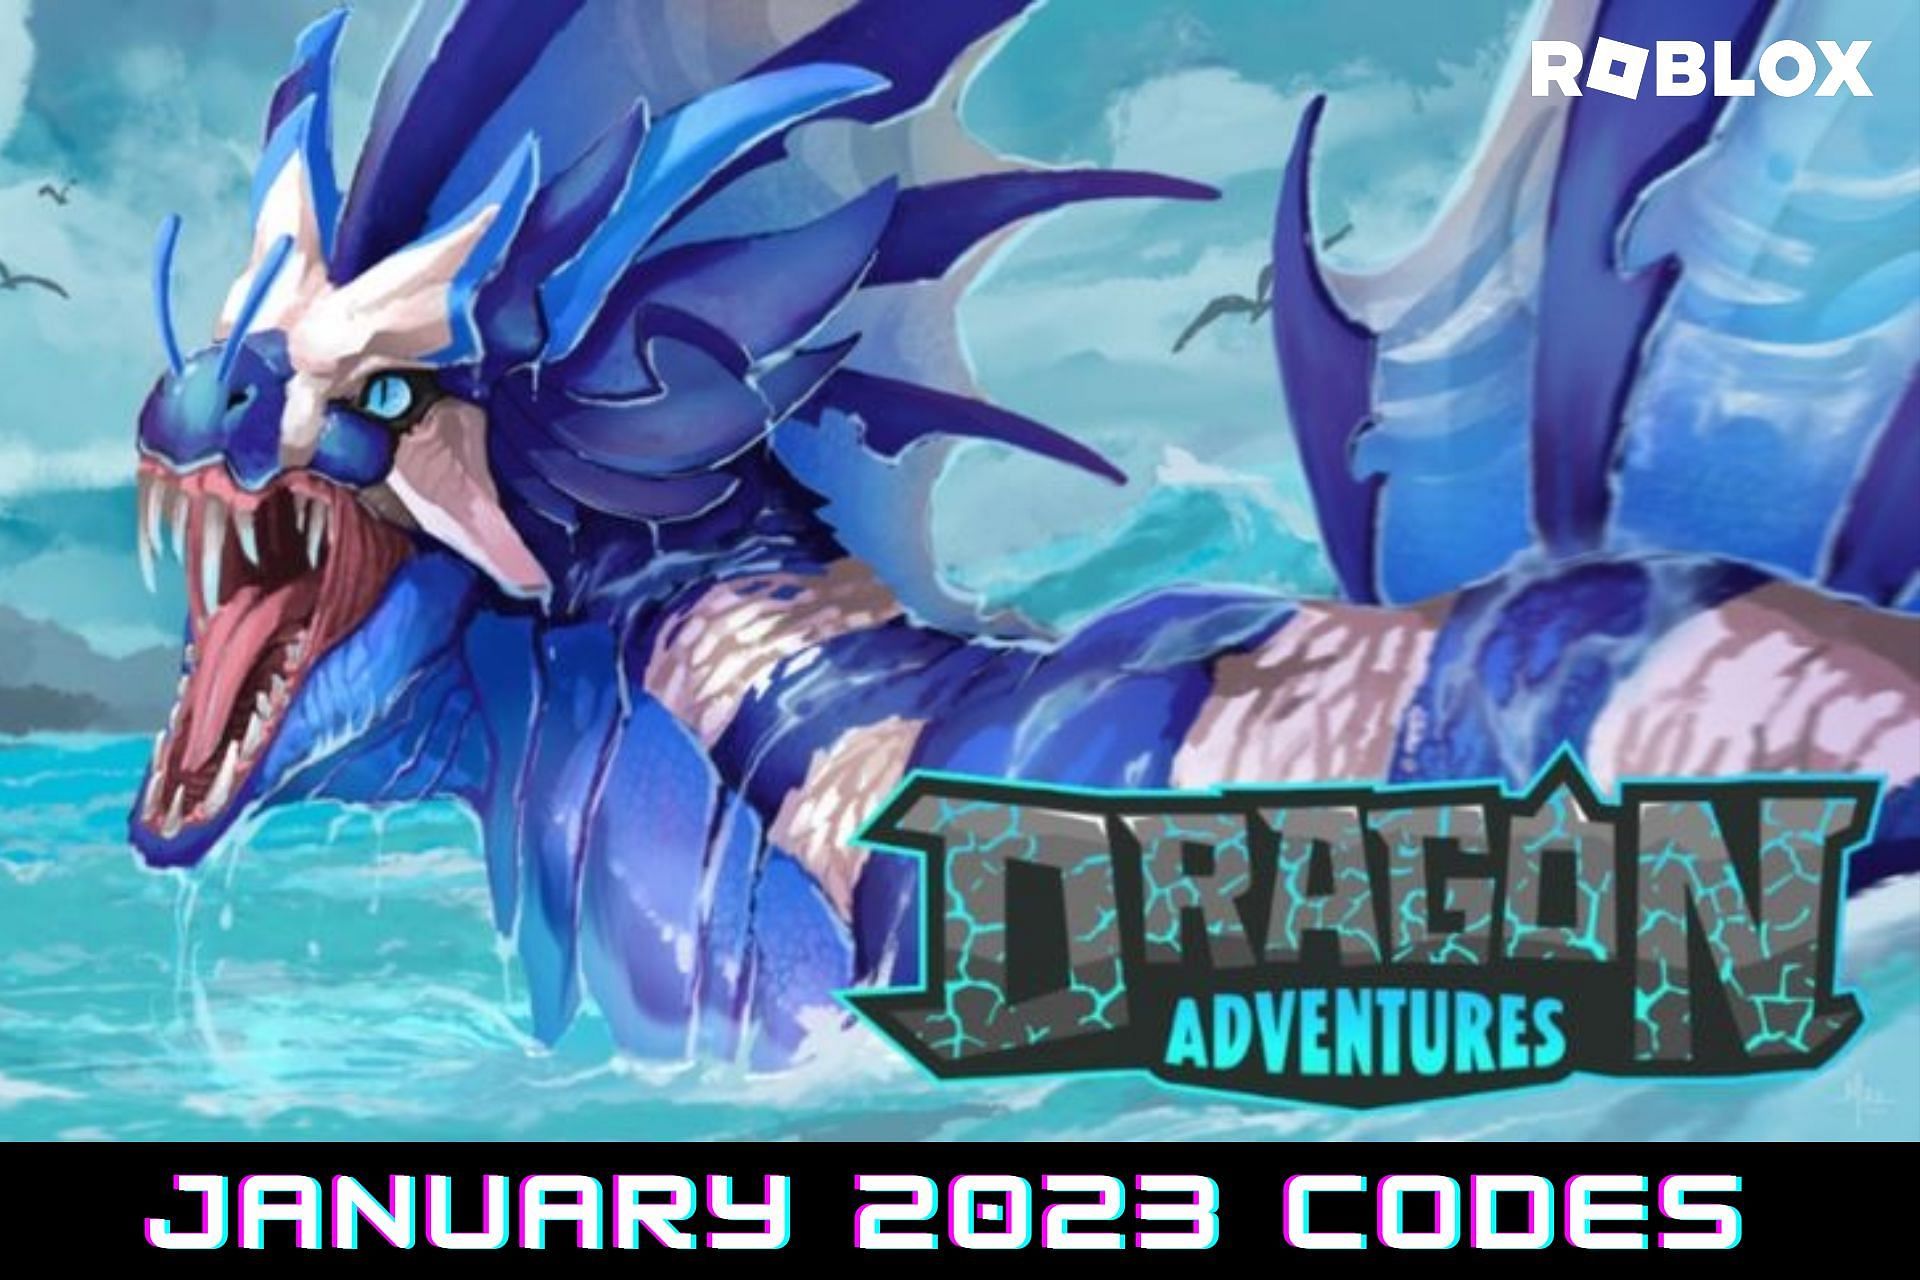 Roblox Dragon Adventures codes for January 2023: Free potions